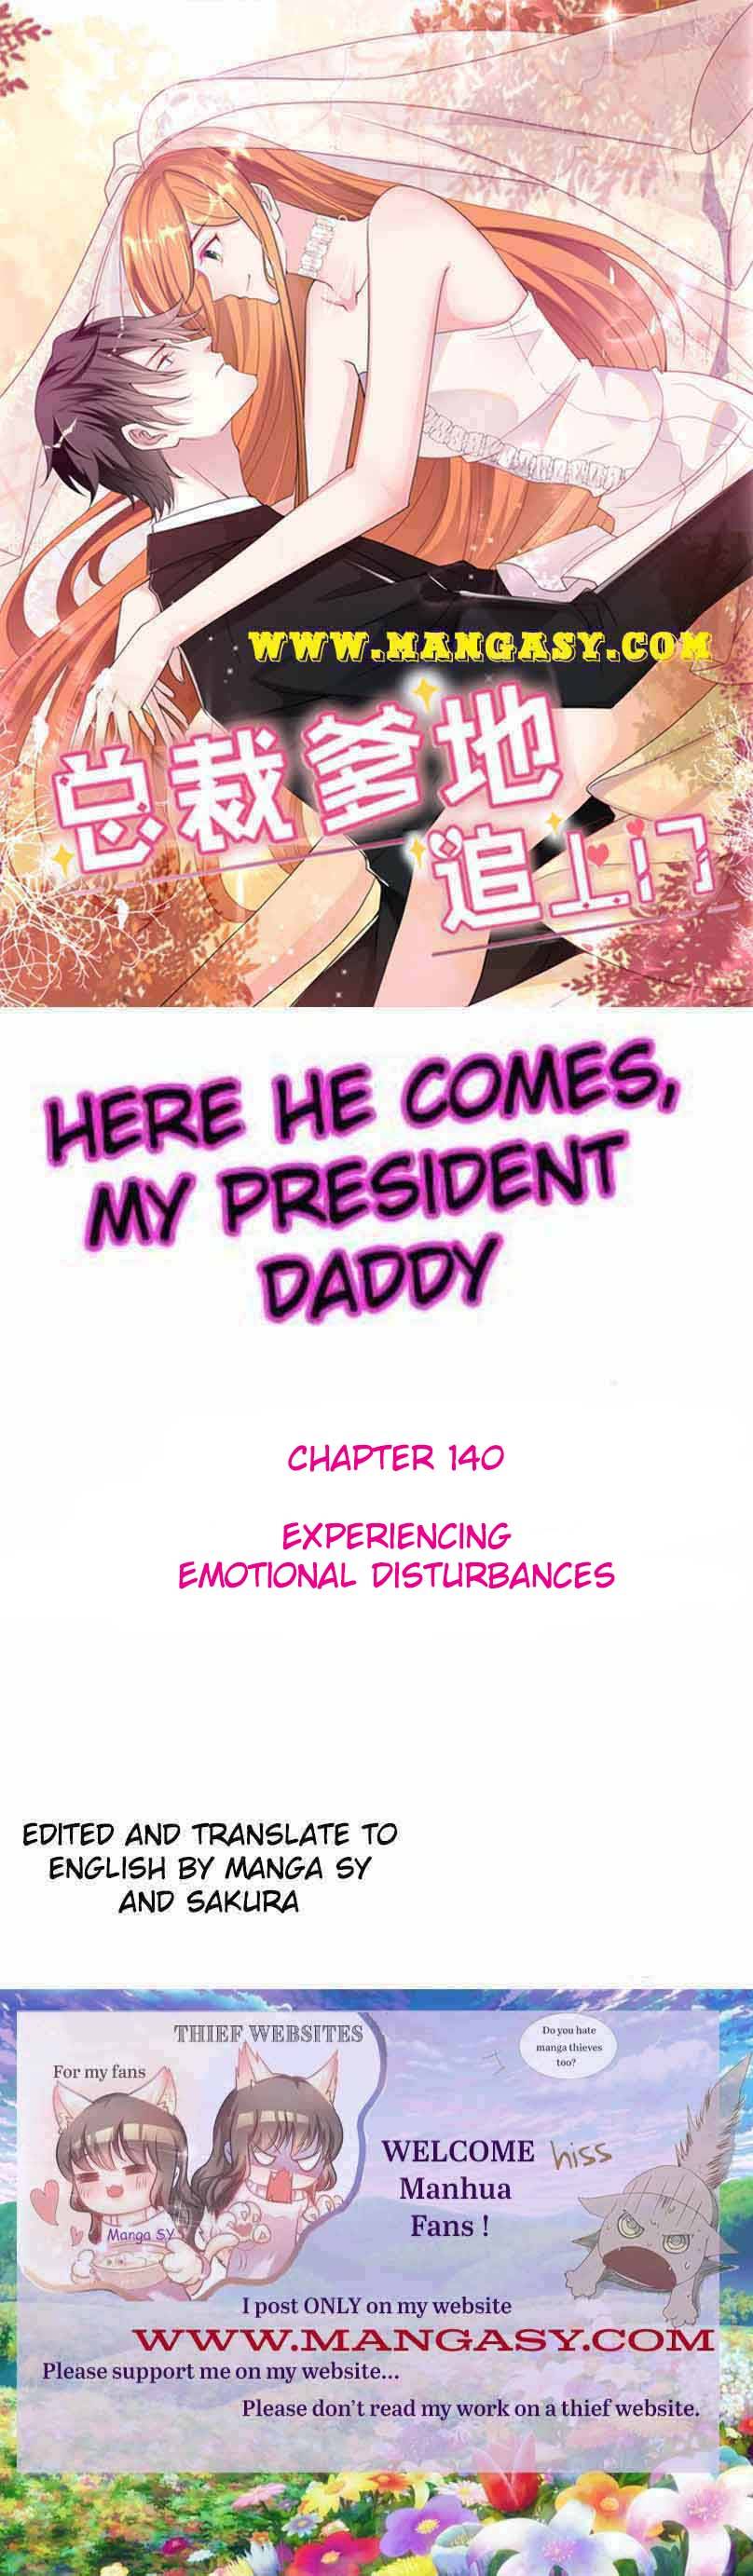 President daddy is chasing you Chapter 140 - page 1